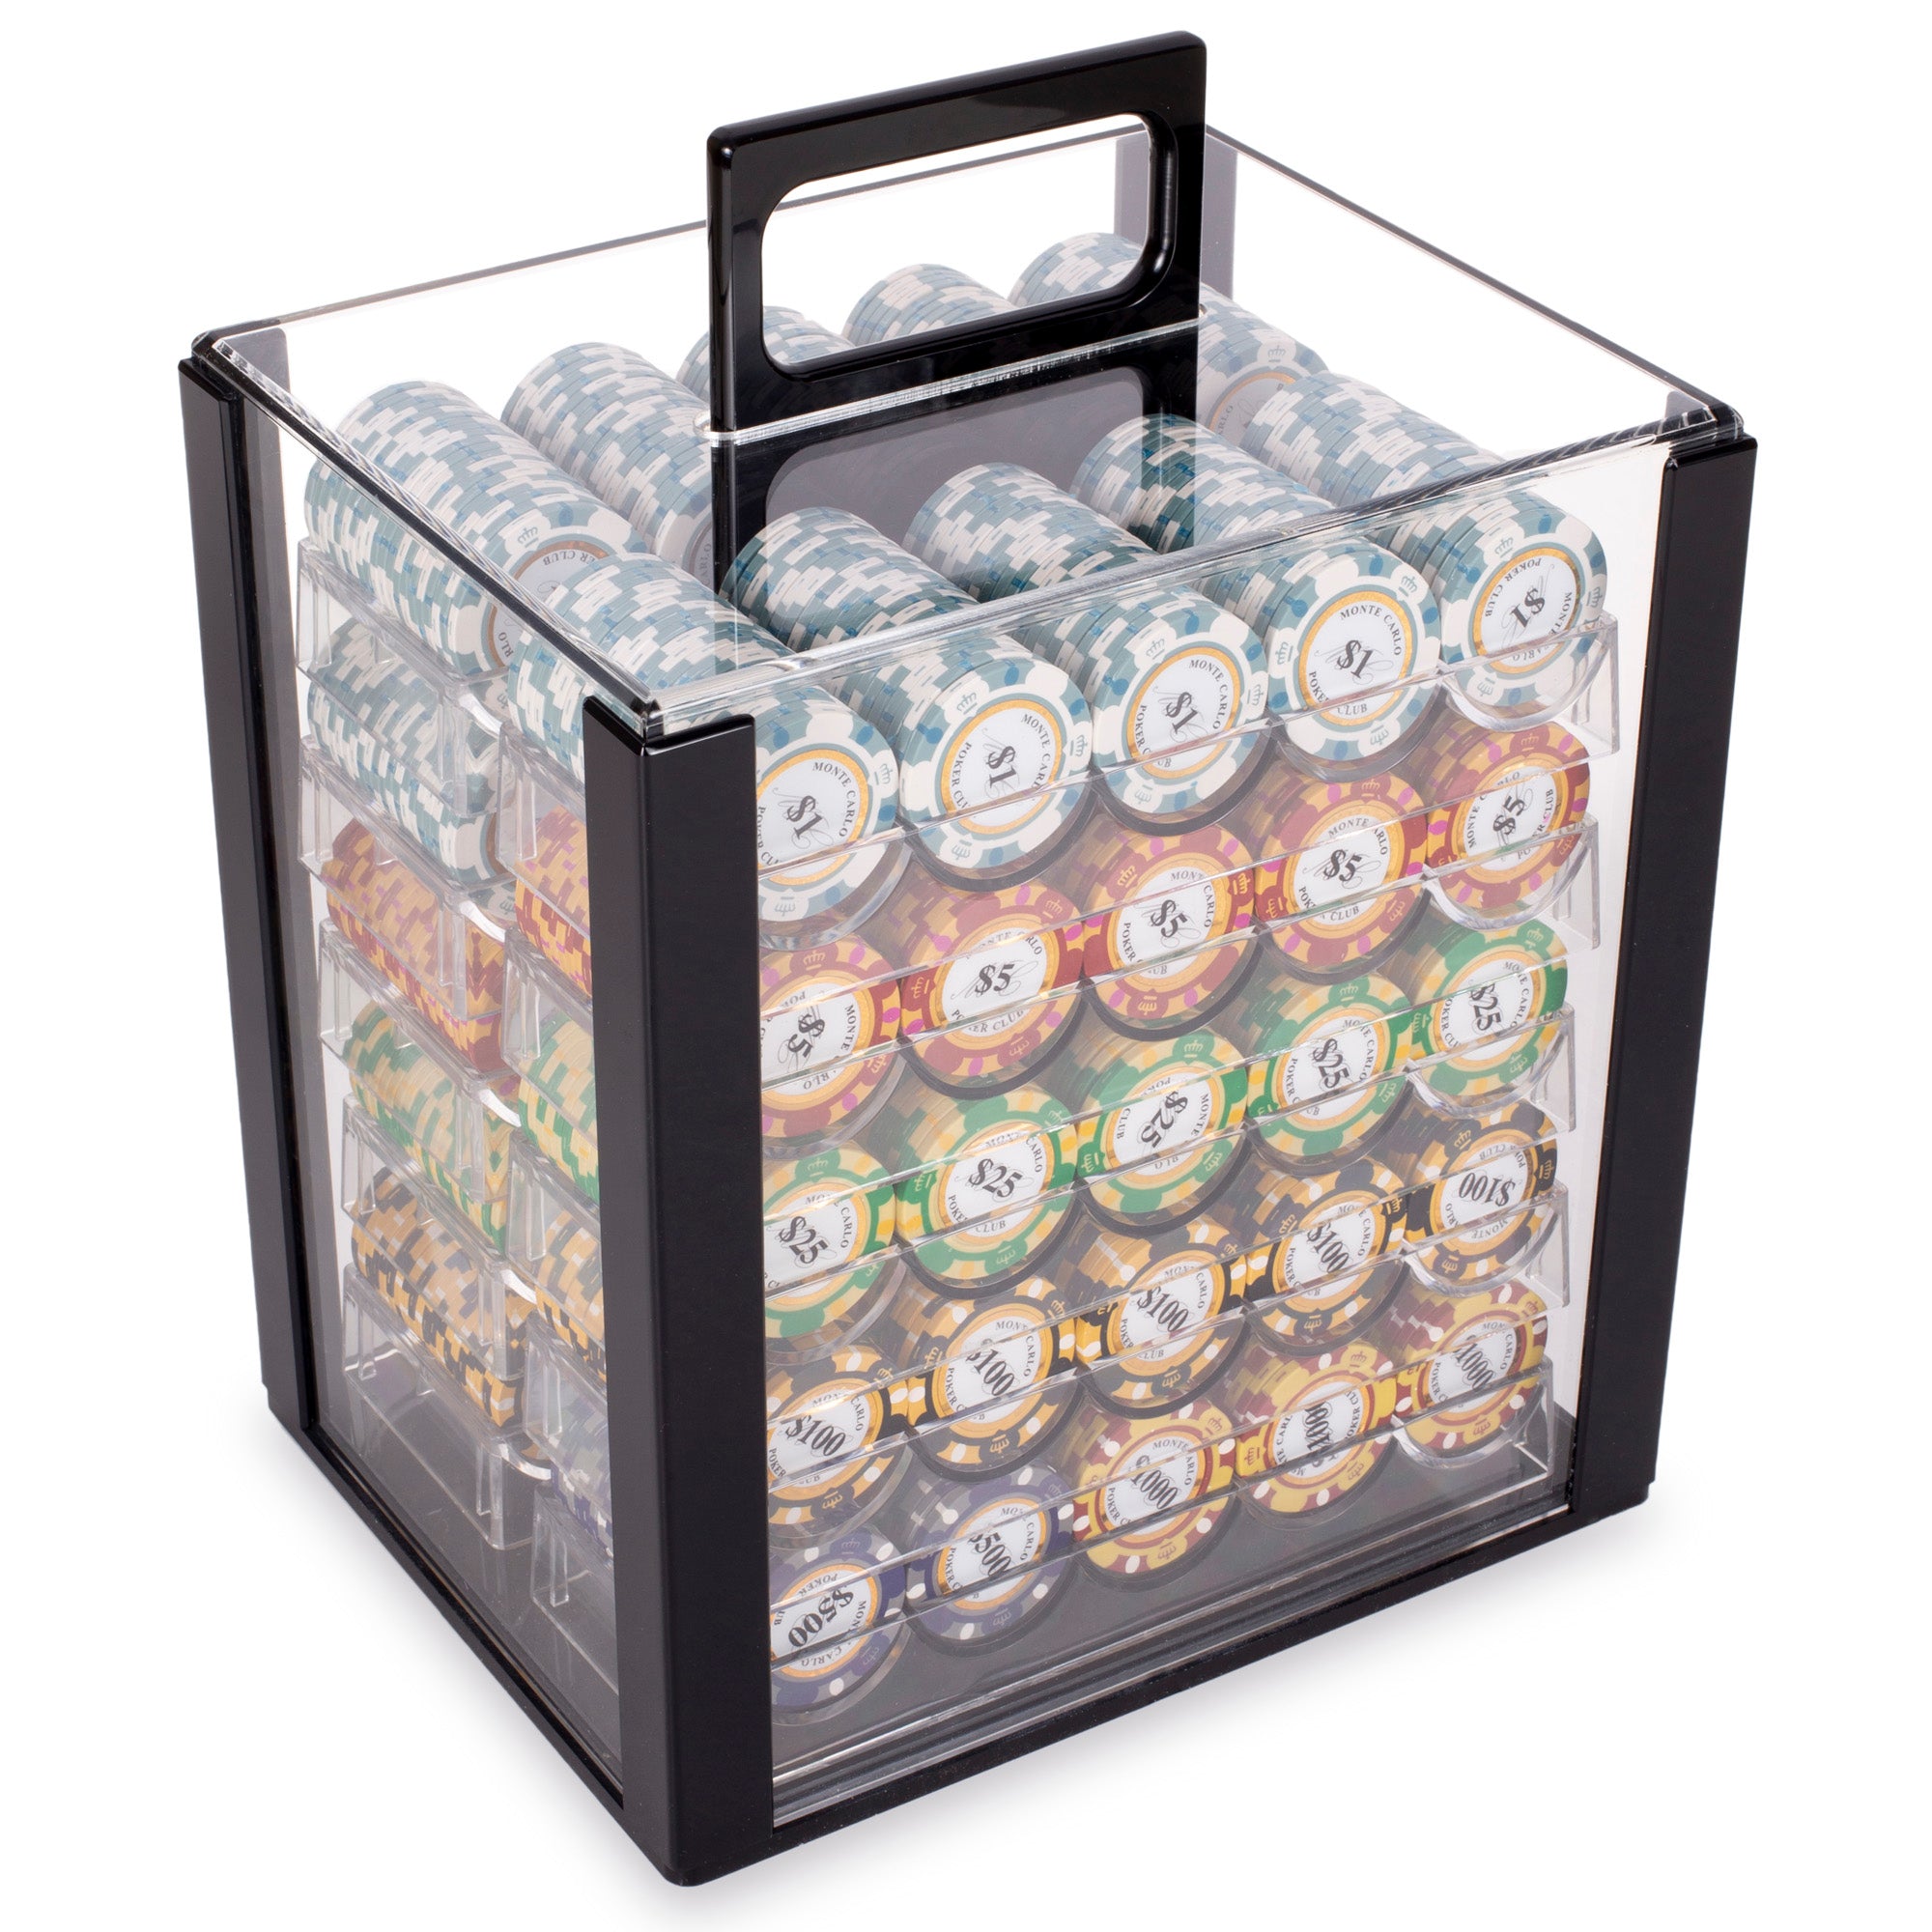 Monte Carlo 14-gram Poker Chip Set in Acrylic Case (1000 Count) - Clay Composite Holo Inlay